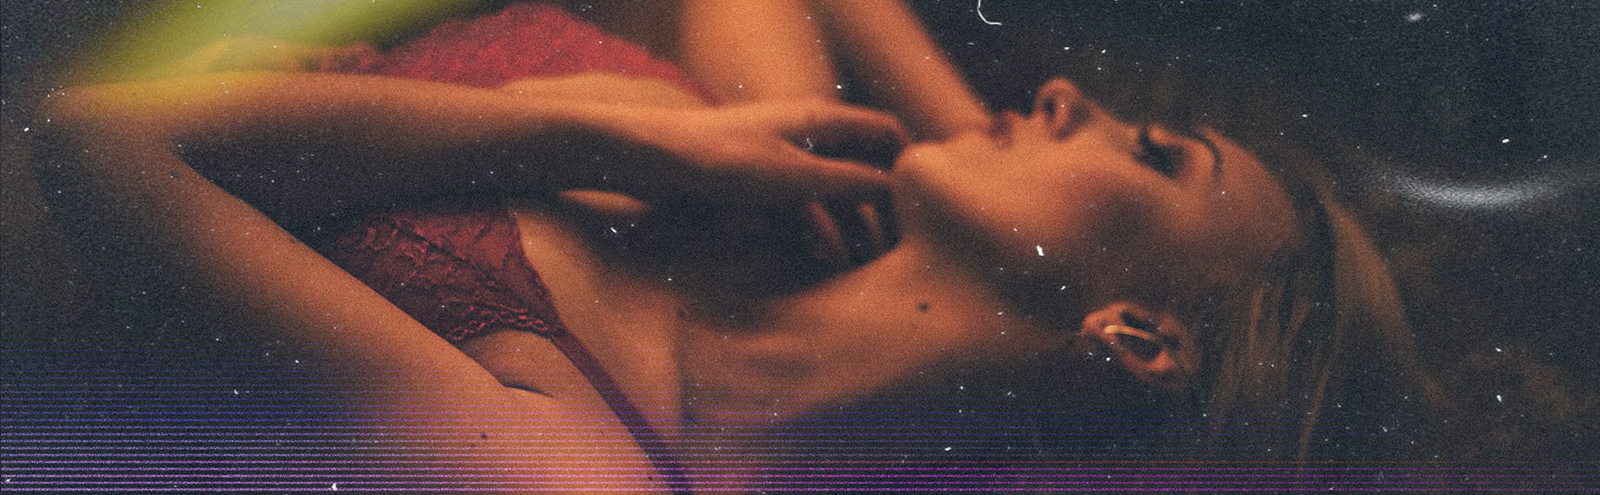 X Sex Videos Keenly - The 18 Best Sex Podcasts Right Now